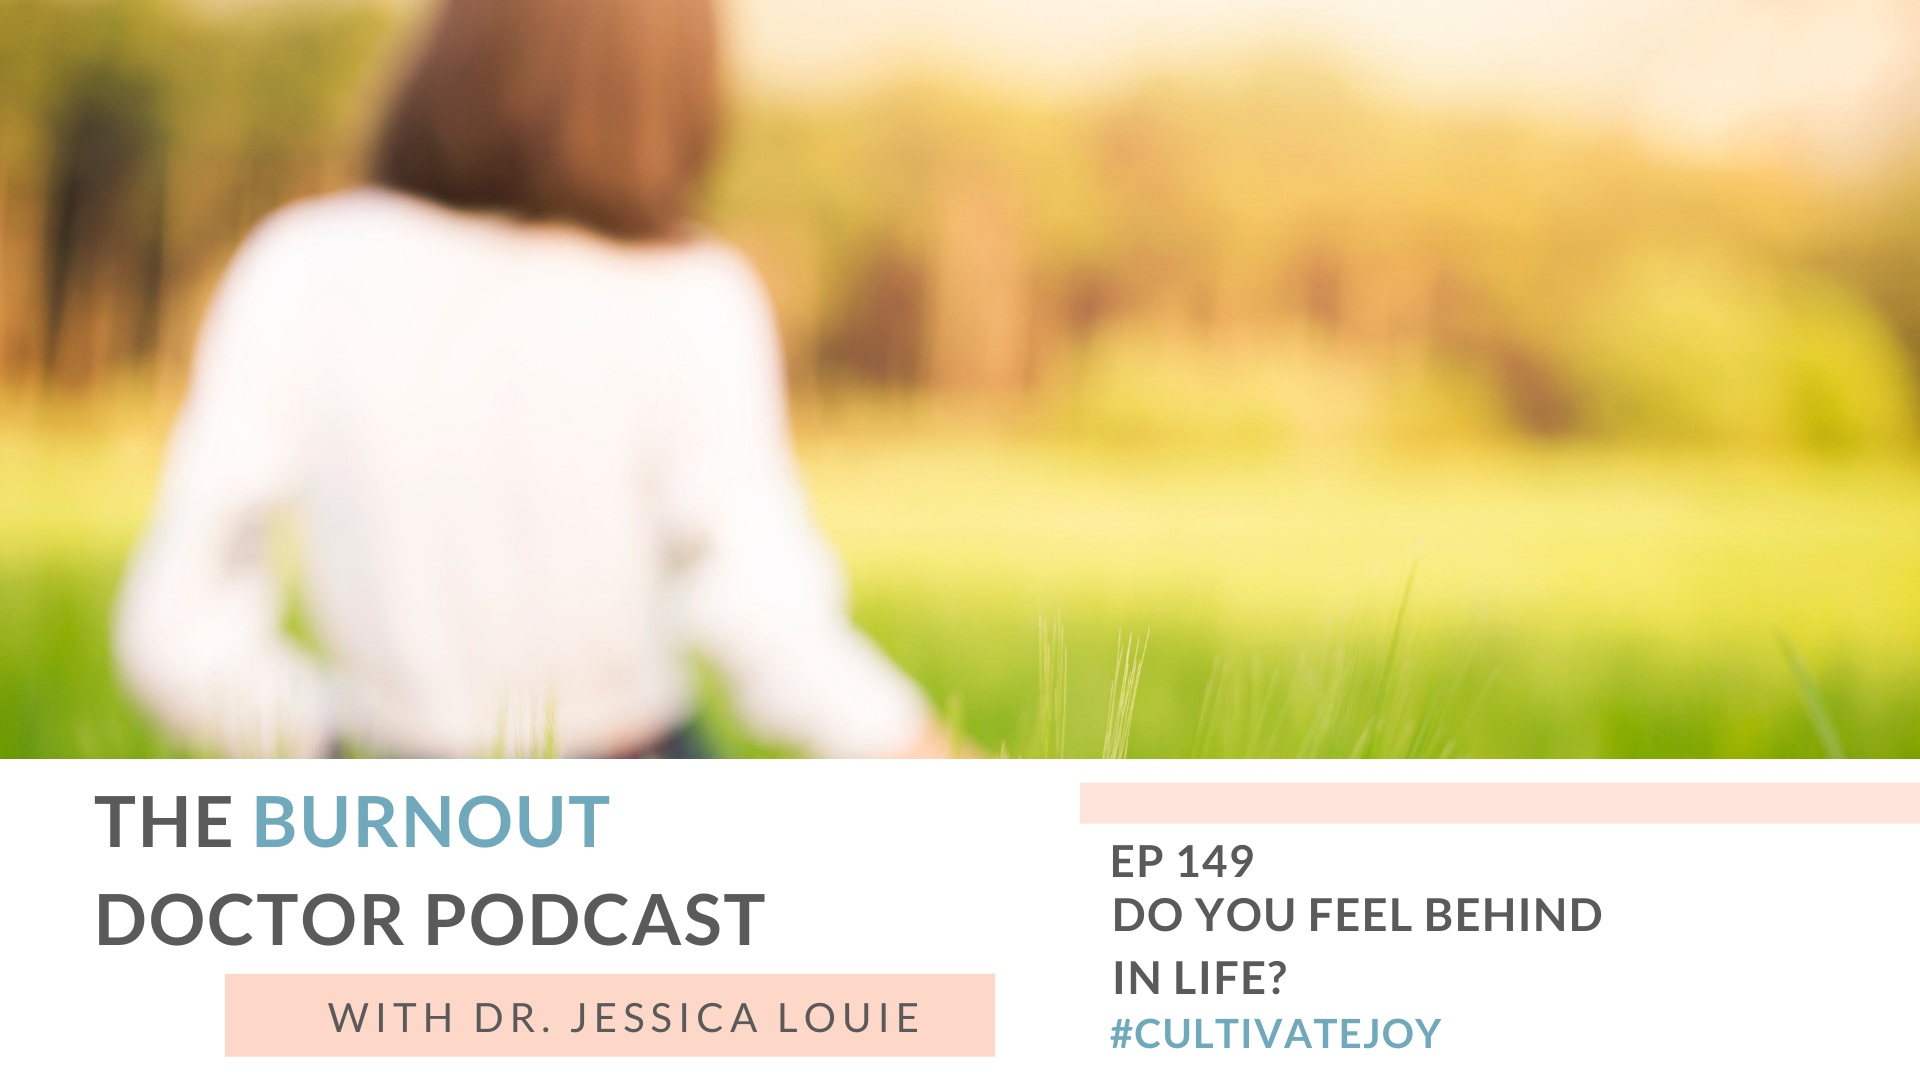 What to do if you feel behind in life. Life passing you by. Pharmacist burnout speaker. Keynote speaker. The Burnout Doctor Podcast. Dr. Jessica Louie